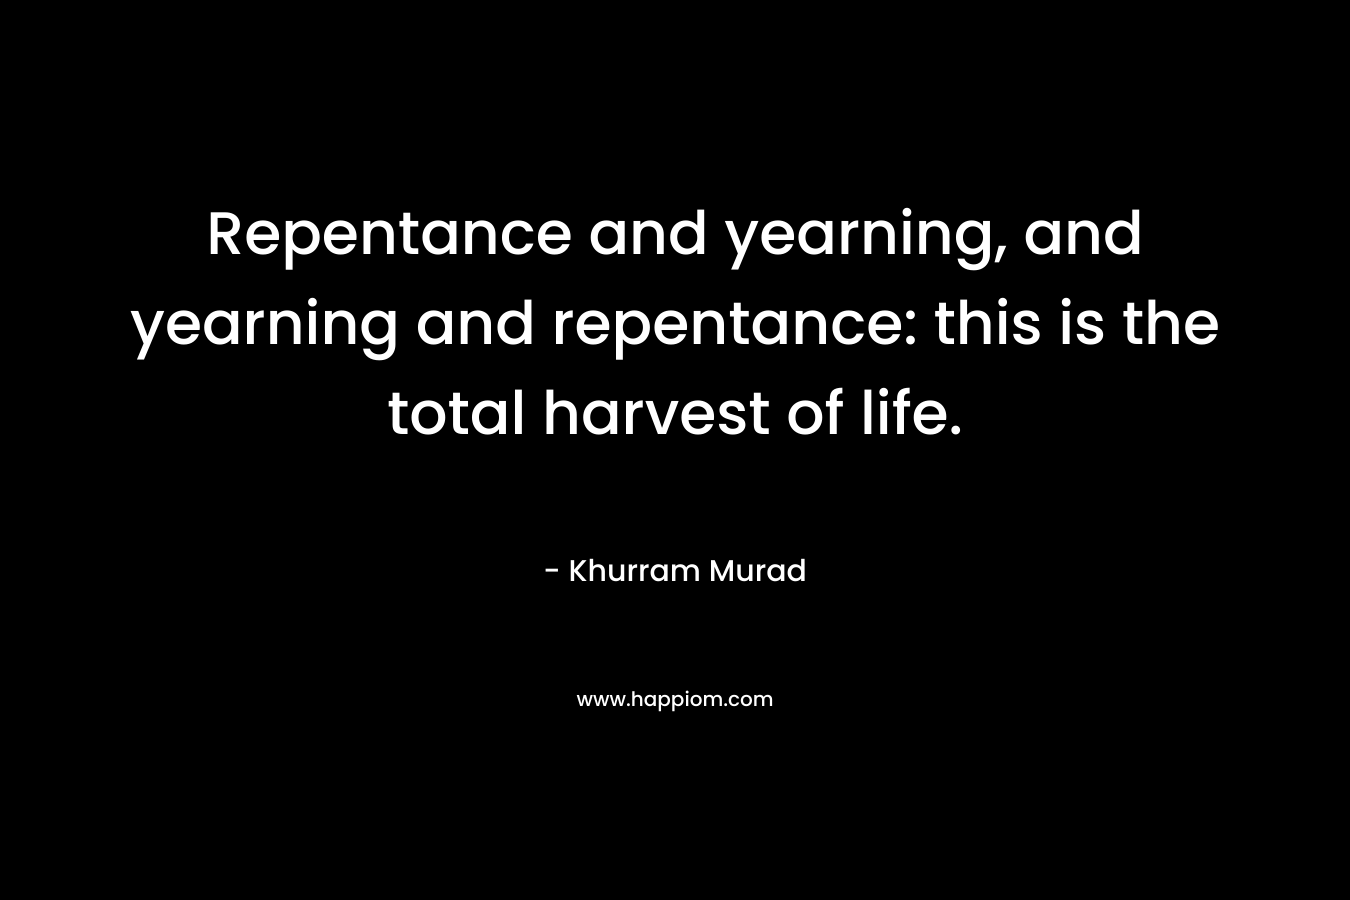 Repentance and yearning, and yearning and repentance: this is the total harvest of life. – Khurram Murad